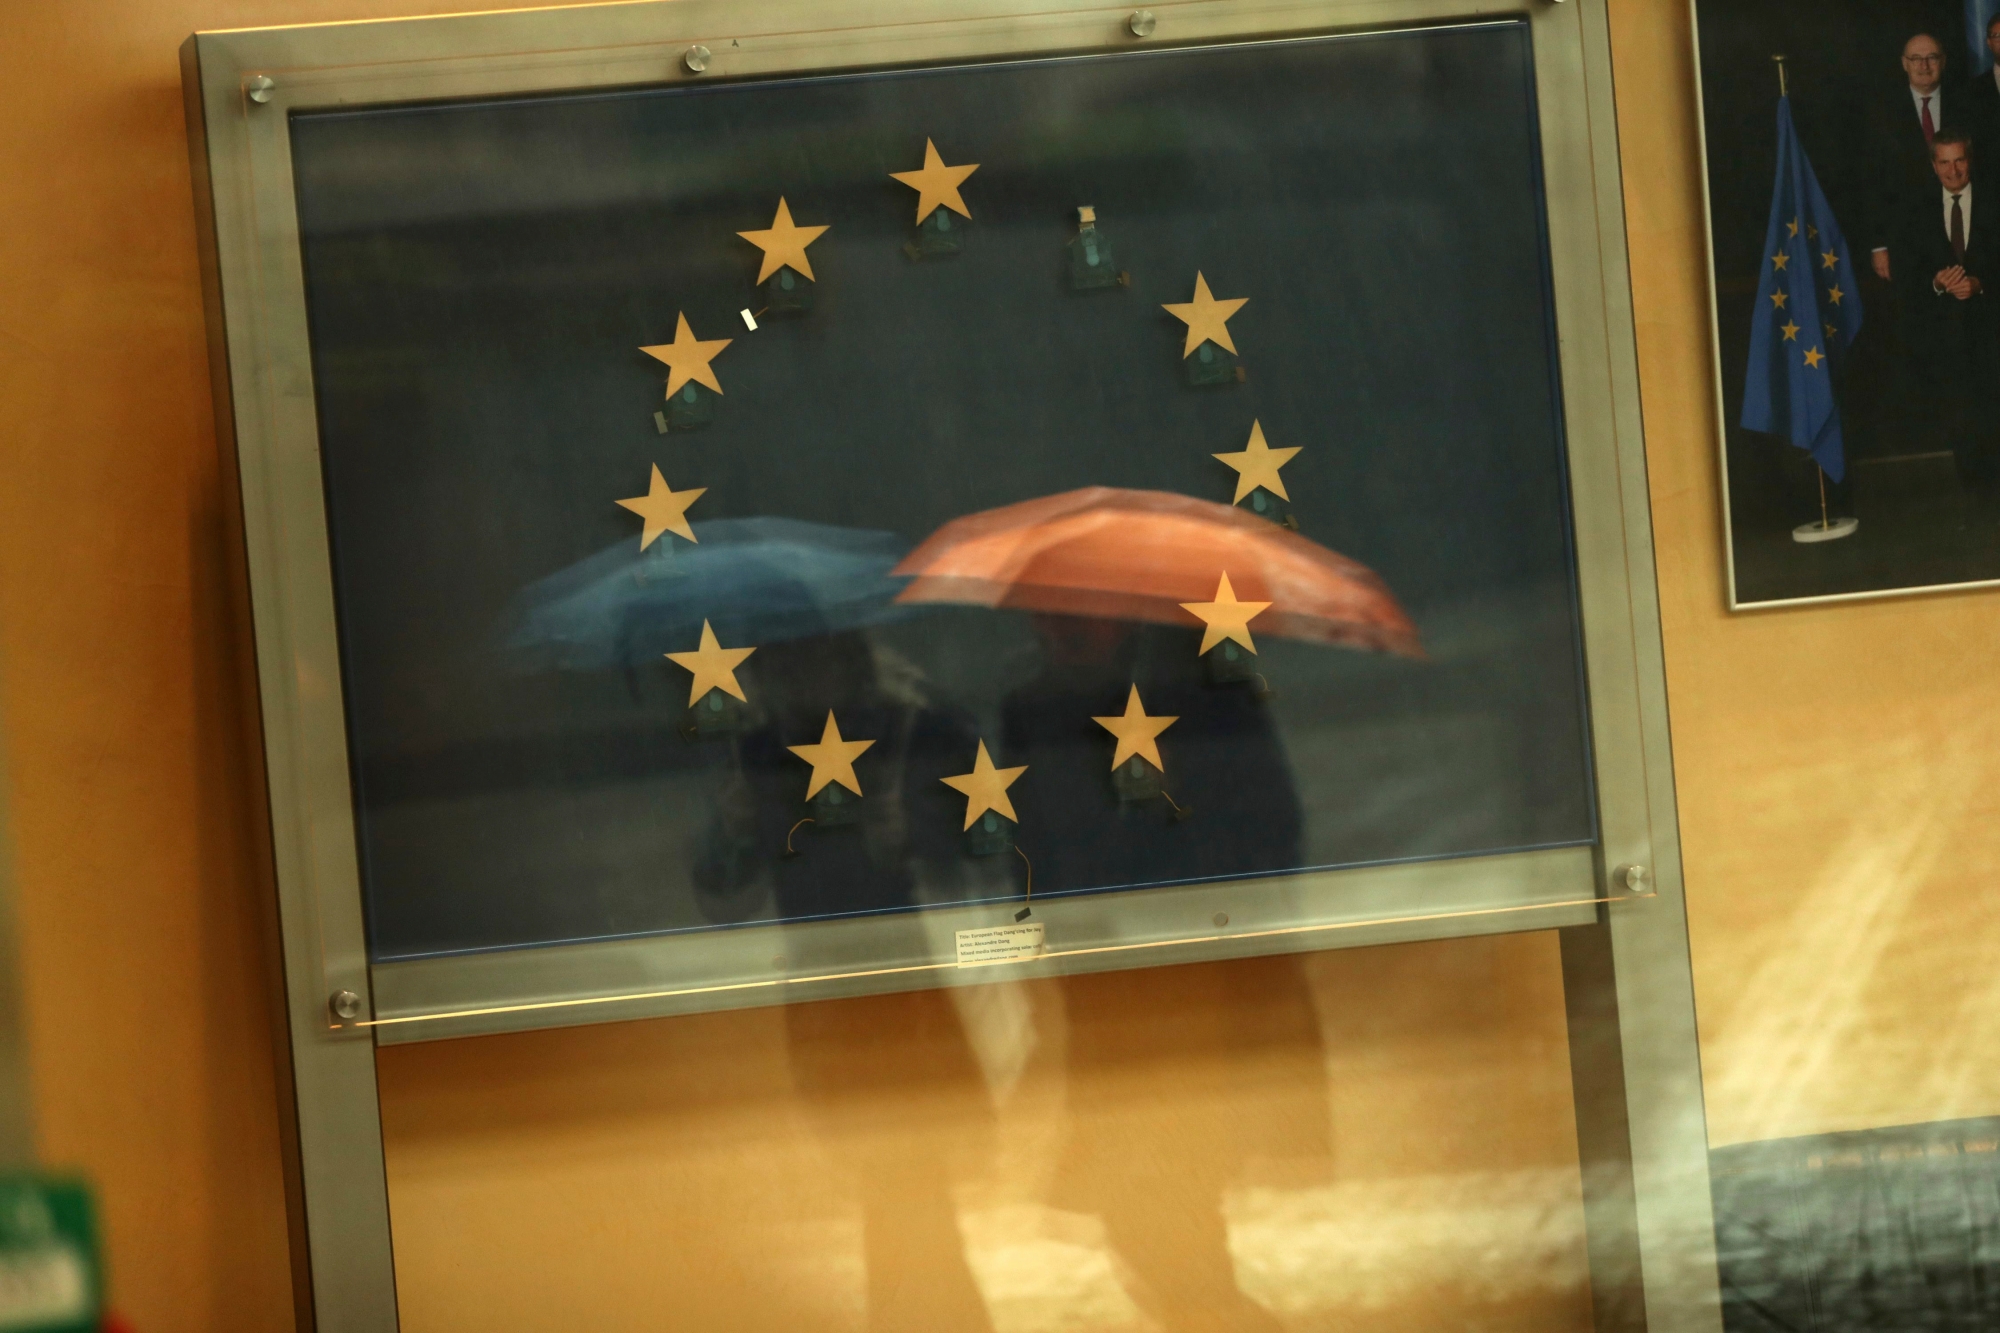 Passers-by are reflected in an artwork based on the European Union flag, with one star missing, in the European Commissions headquarters in Brussels, Monday, Nov. 12, 2018. Britain's European Union partners on Monday ratcheted up political pressure on Prime Minister Theresa May amid signs that some progress is being made in Brexit negotiations. (AP Photo/Francisco Seco) Belgium EU Brexit